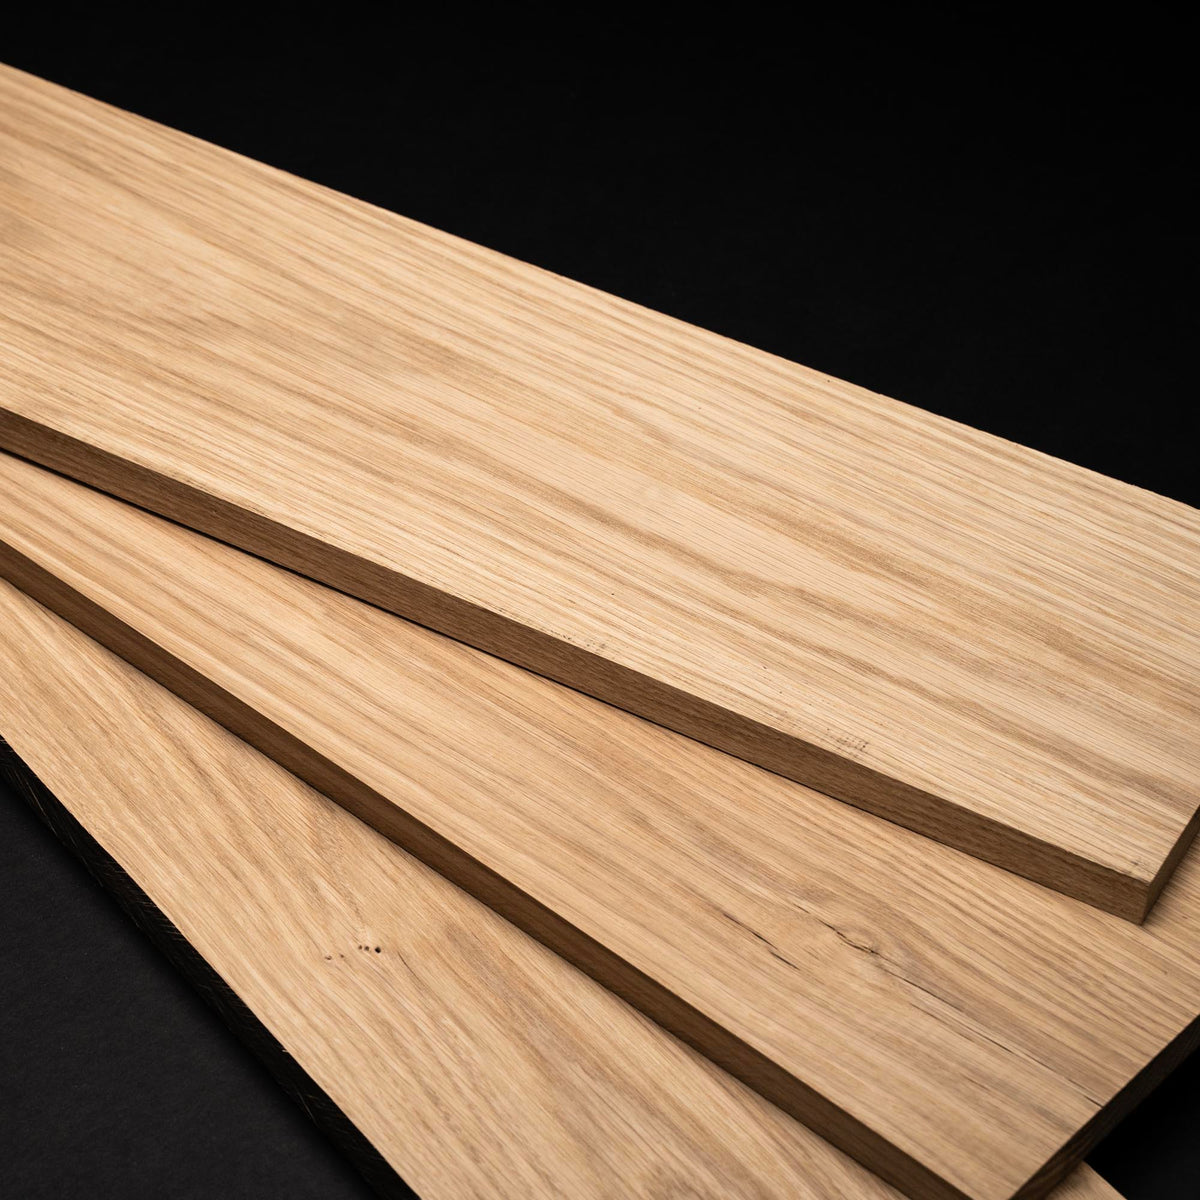 4/4 1&quot; WHITE OAK Lumber Pack, S3S Clear/Select Boards - Kiln Dried - Packs of 10, 50, 100 Board Feet